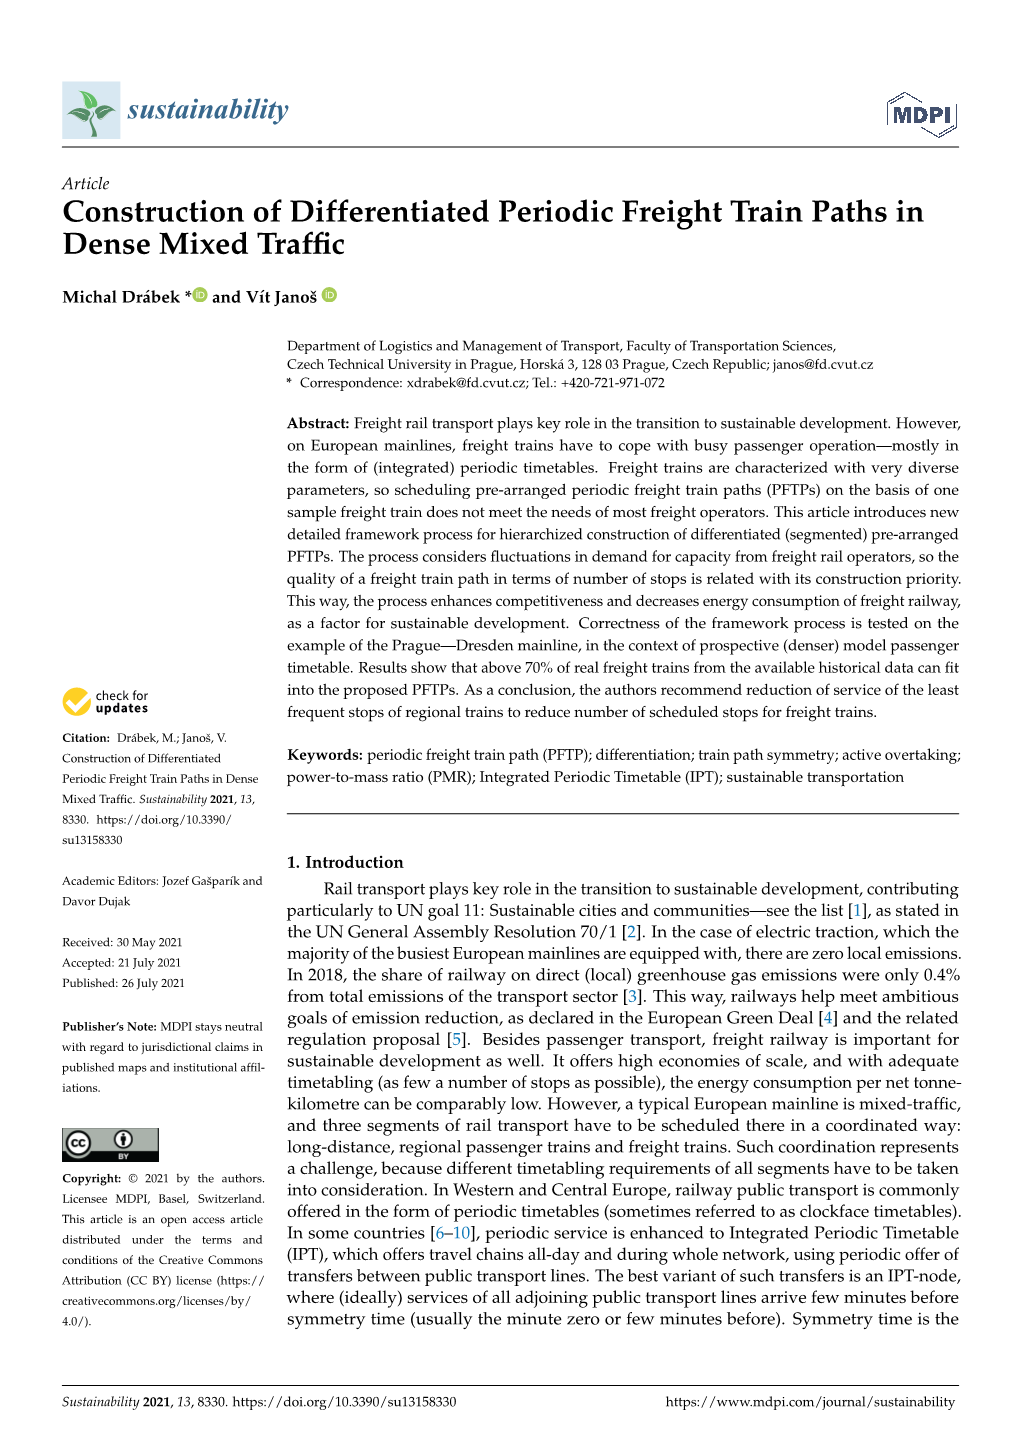 Construction of Differentiated Periodic Freight Train Paths in Dense Mixed Traffic